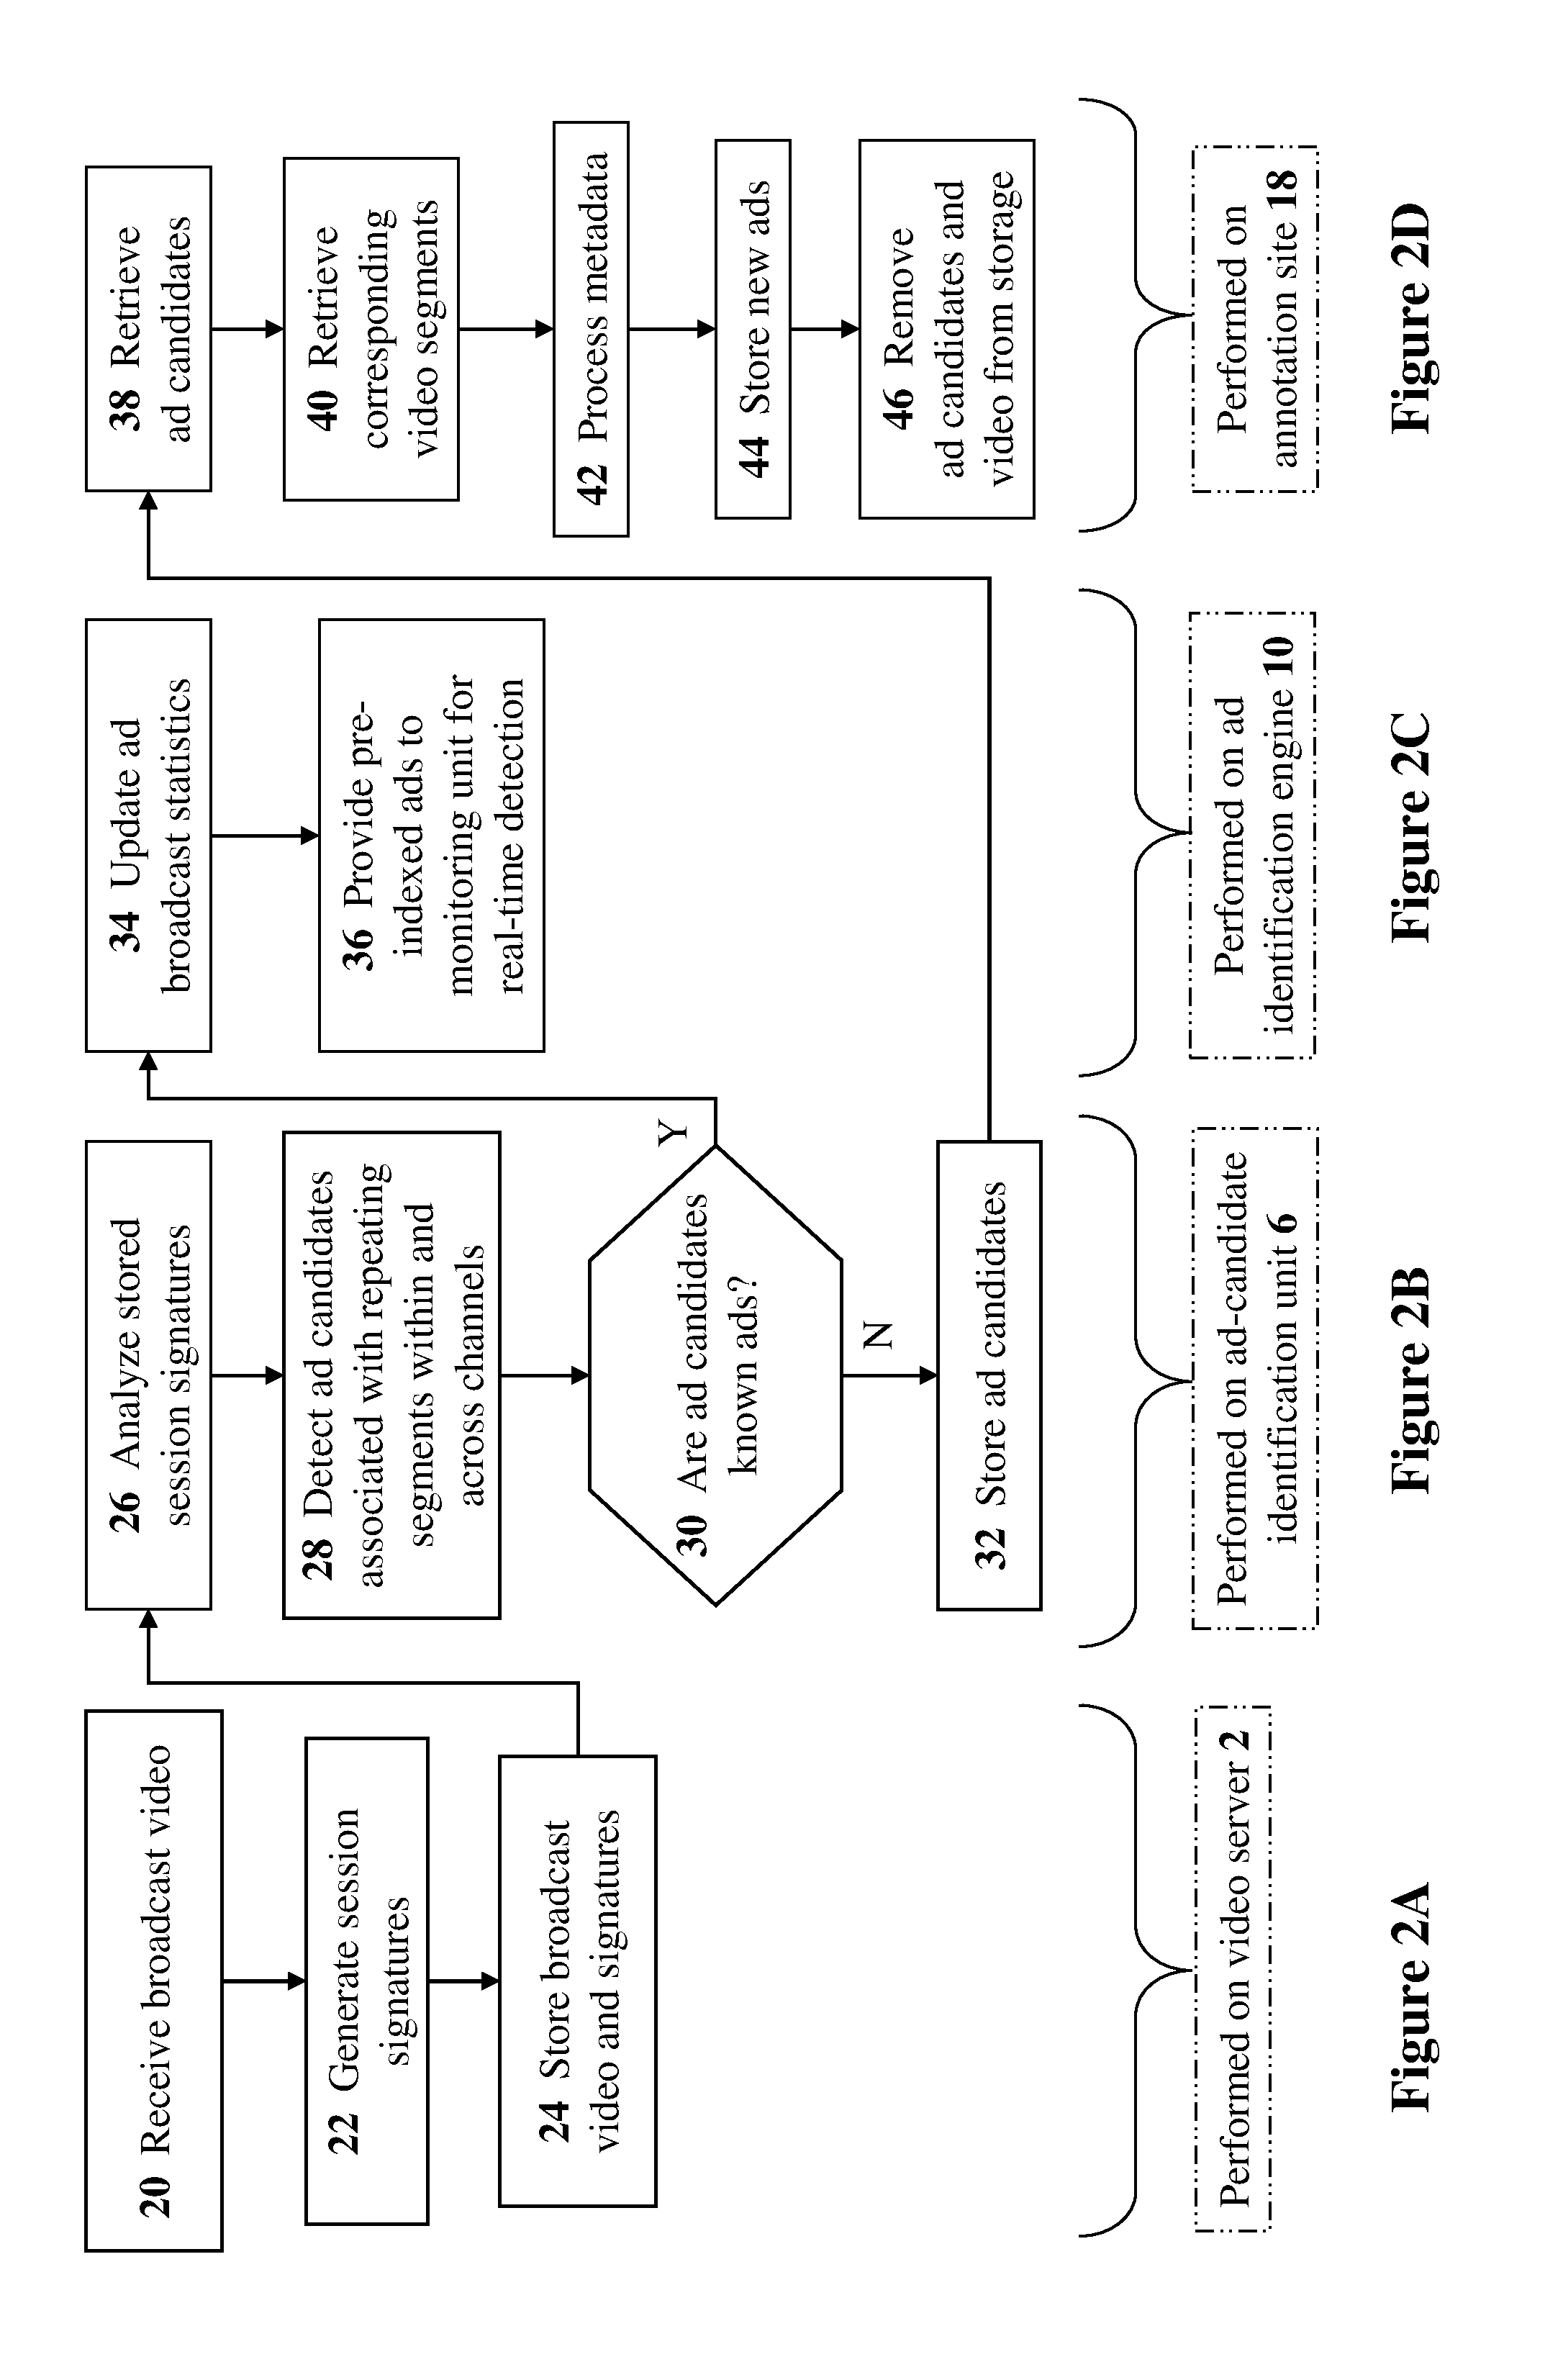 Methods and systems for providing broadcast ad identification